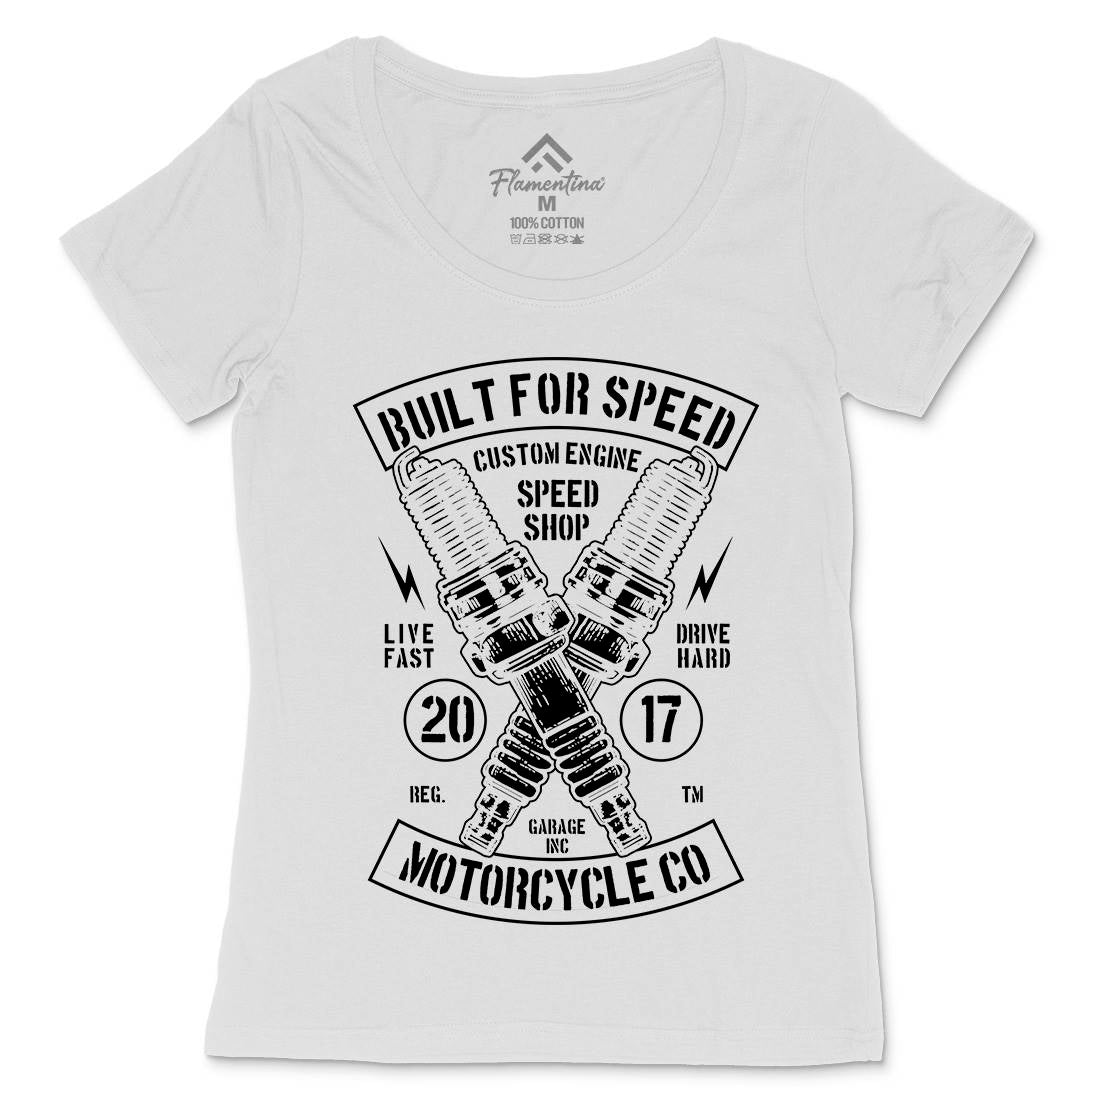 Built For Speed Womens Scoop Neck T-Shirt Motorcycles B188